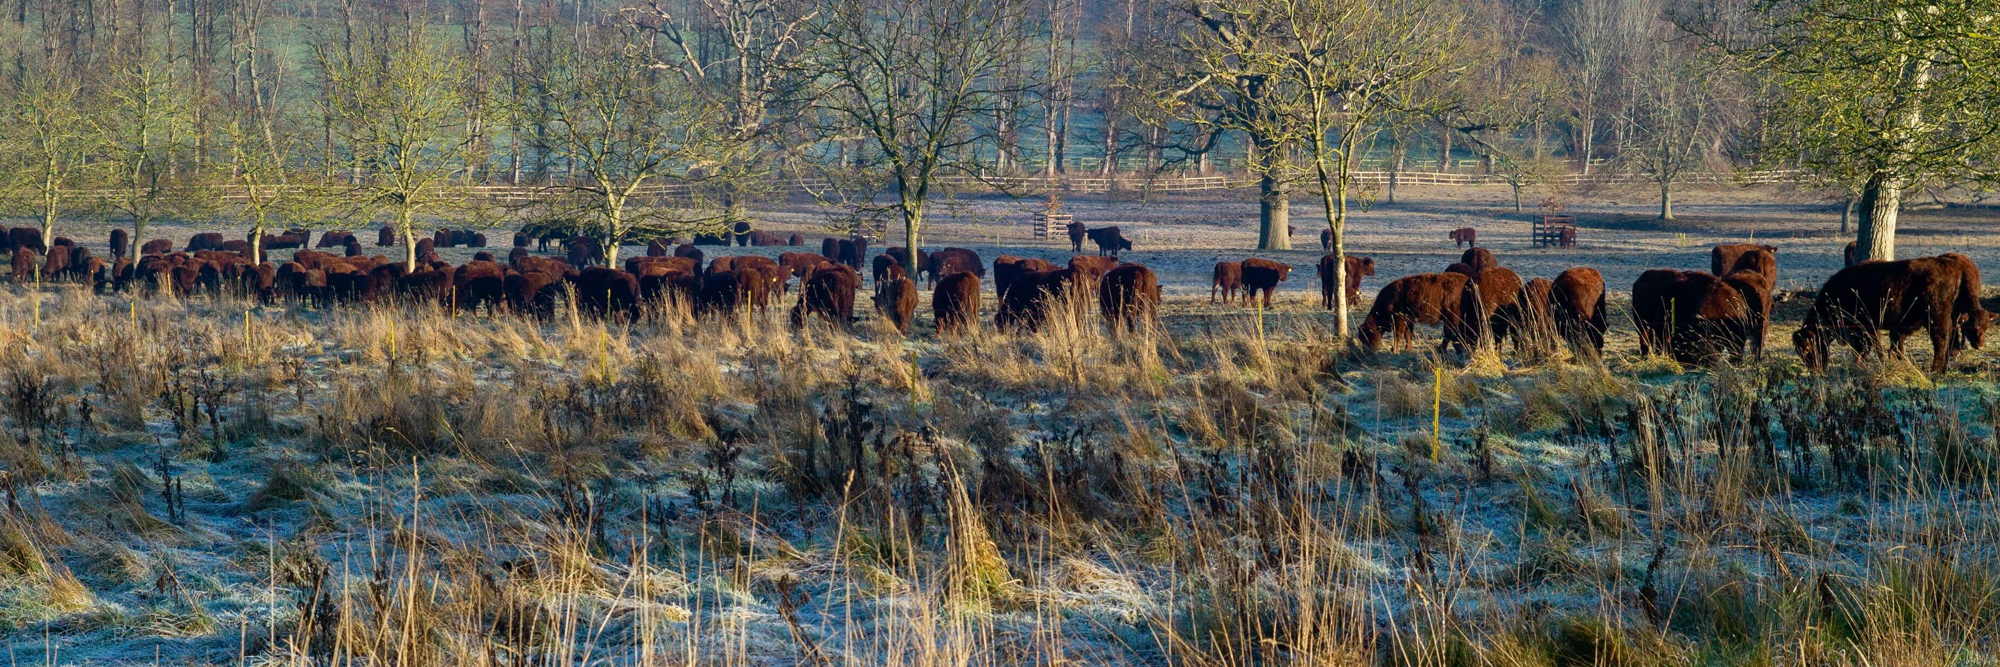 lincoln red cattle winter grazing